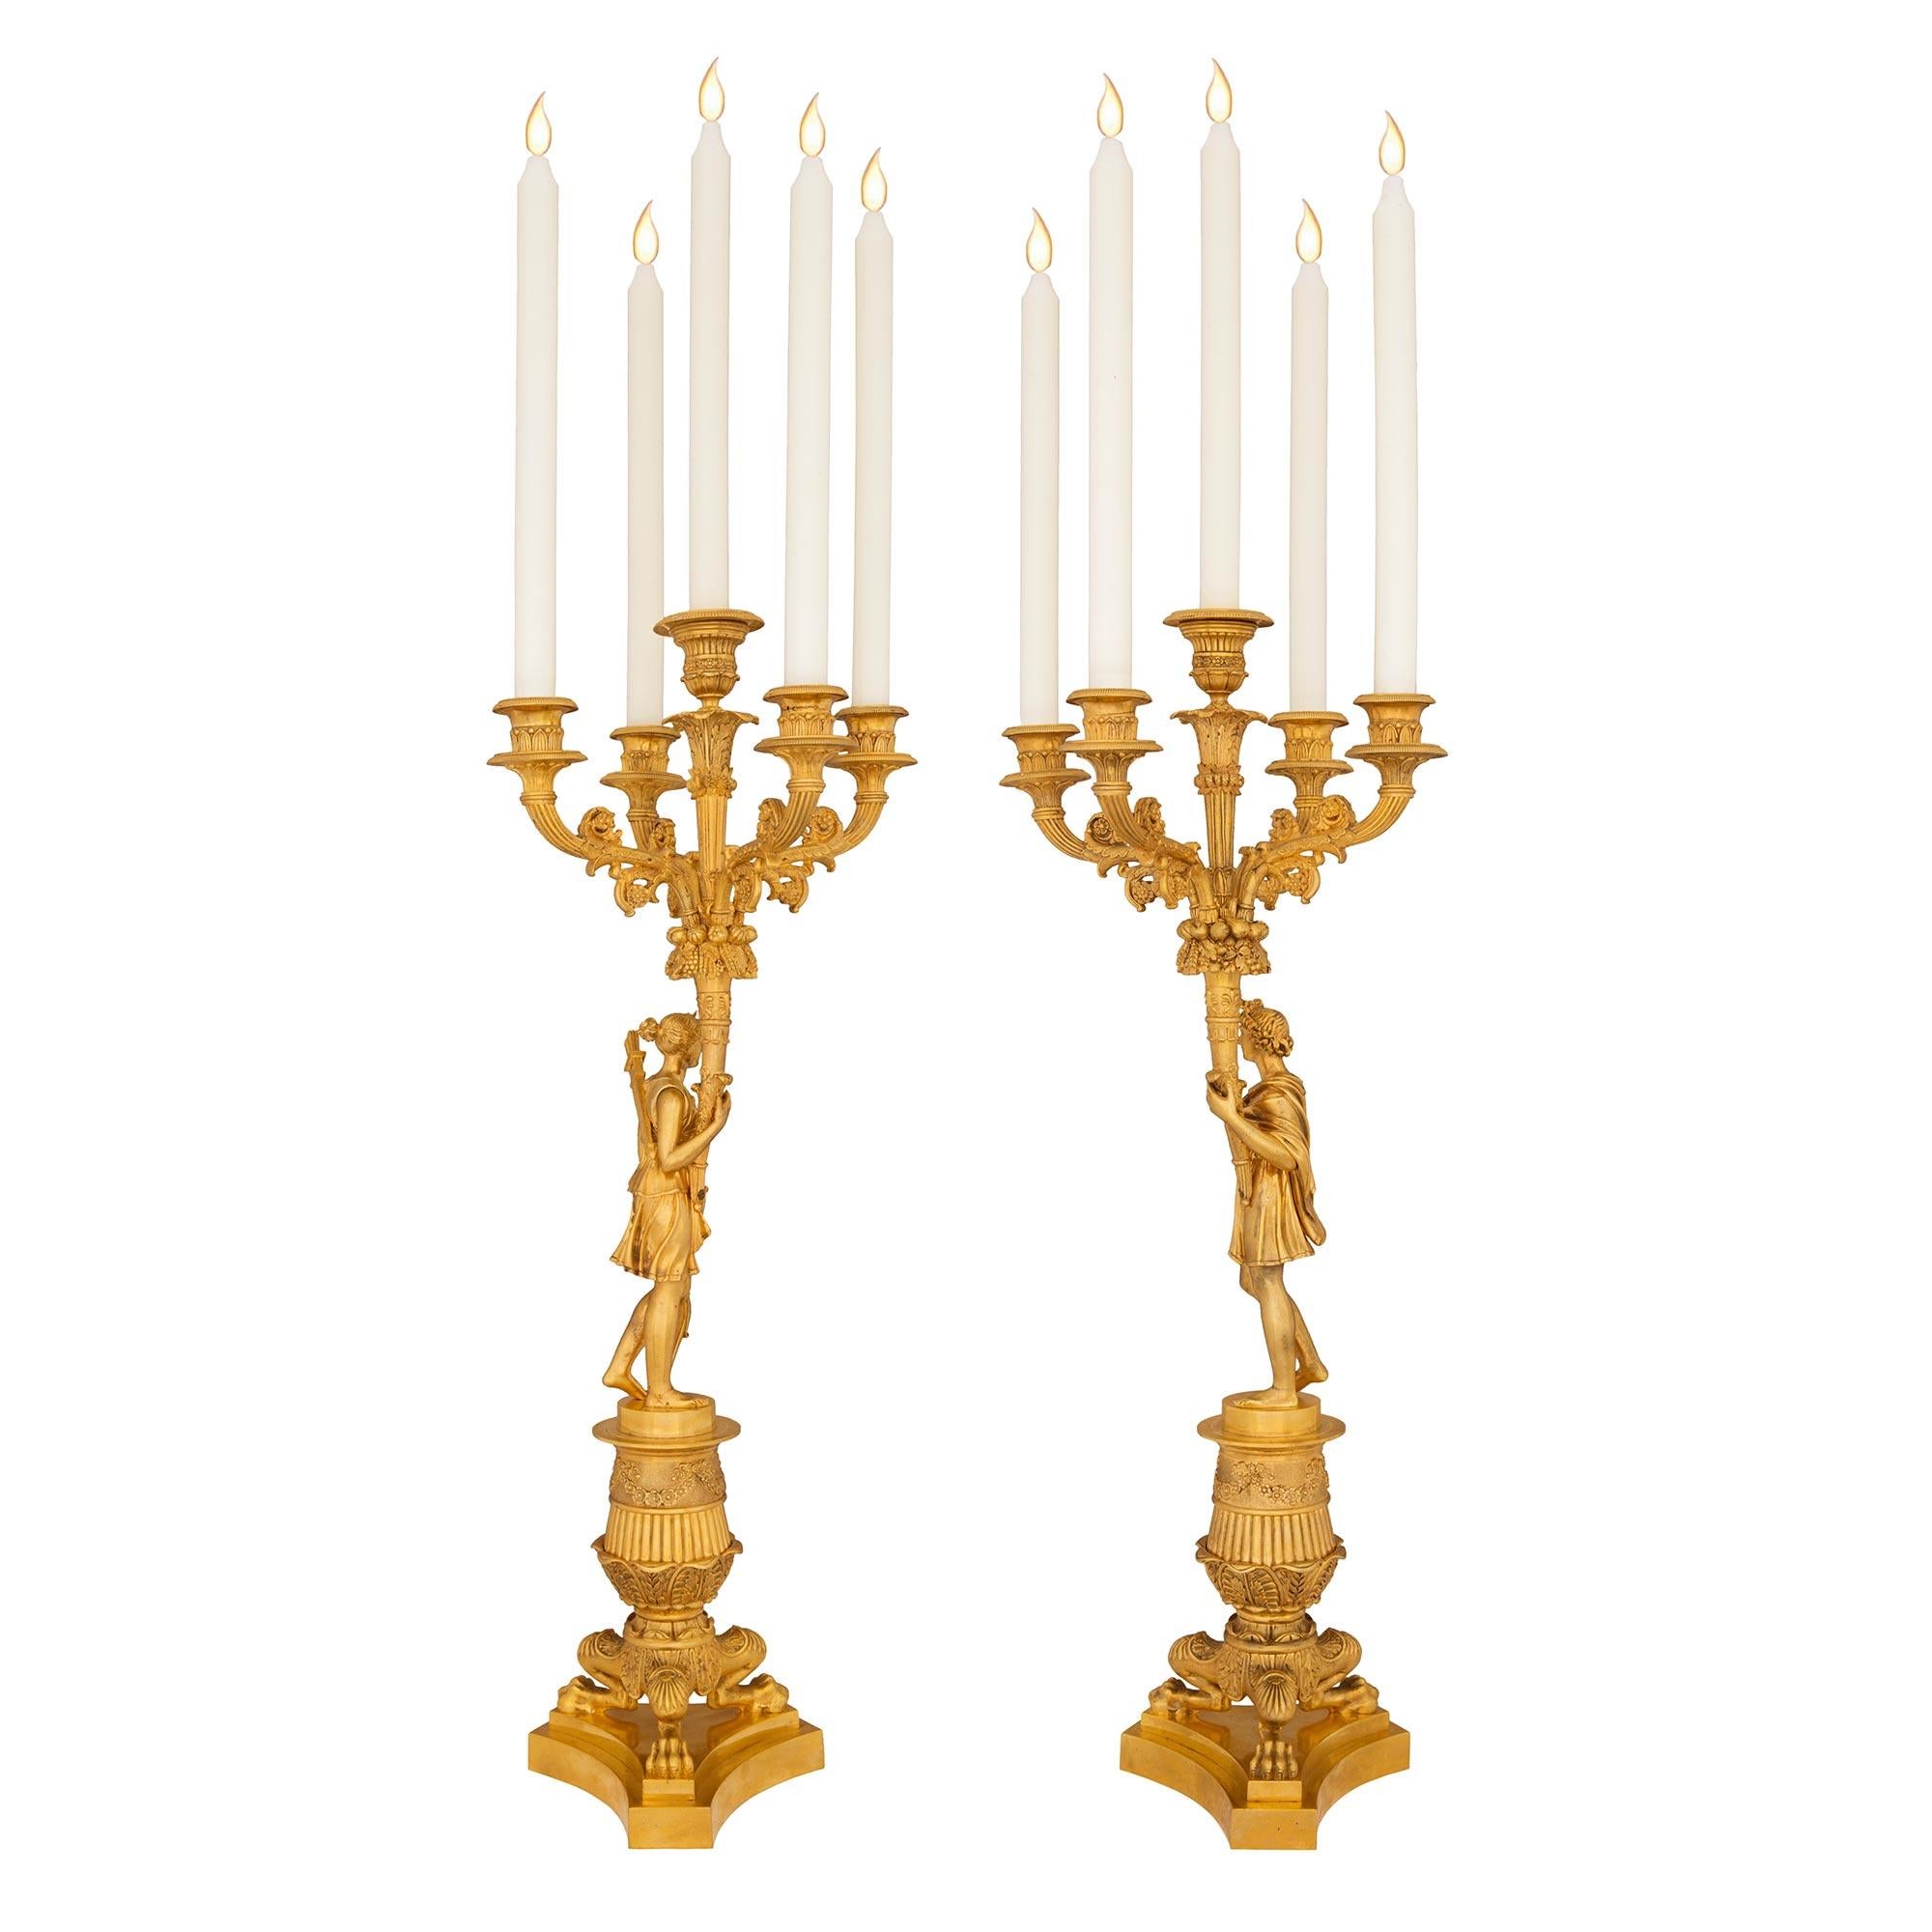 An impressive and high quality pair of French mid 19th century Charles X period ormolu candelabras of Diana the huntress and Augustus. Each candelabra is raised by a triangular base with concave sides and three striking paw feet with beautiful